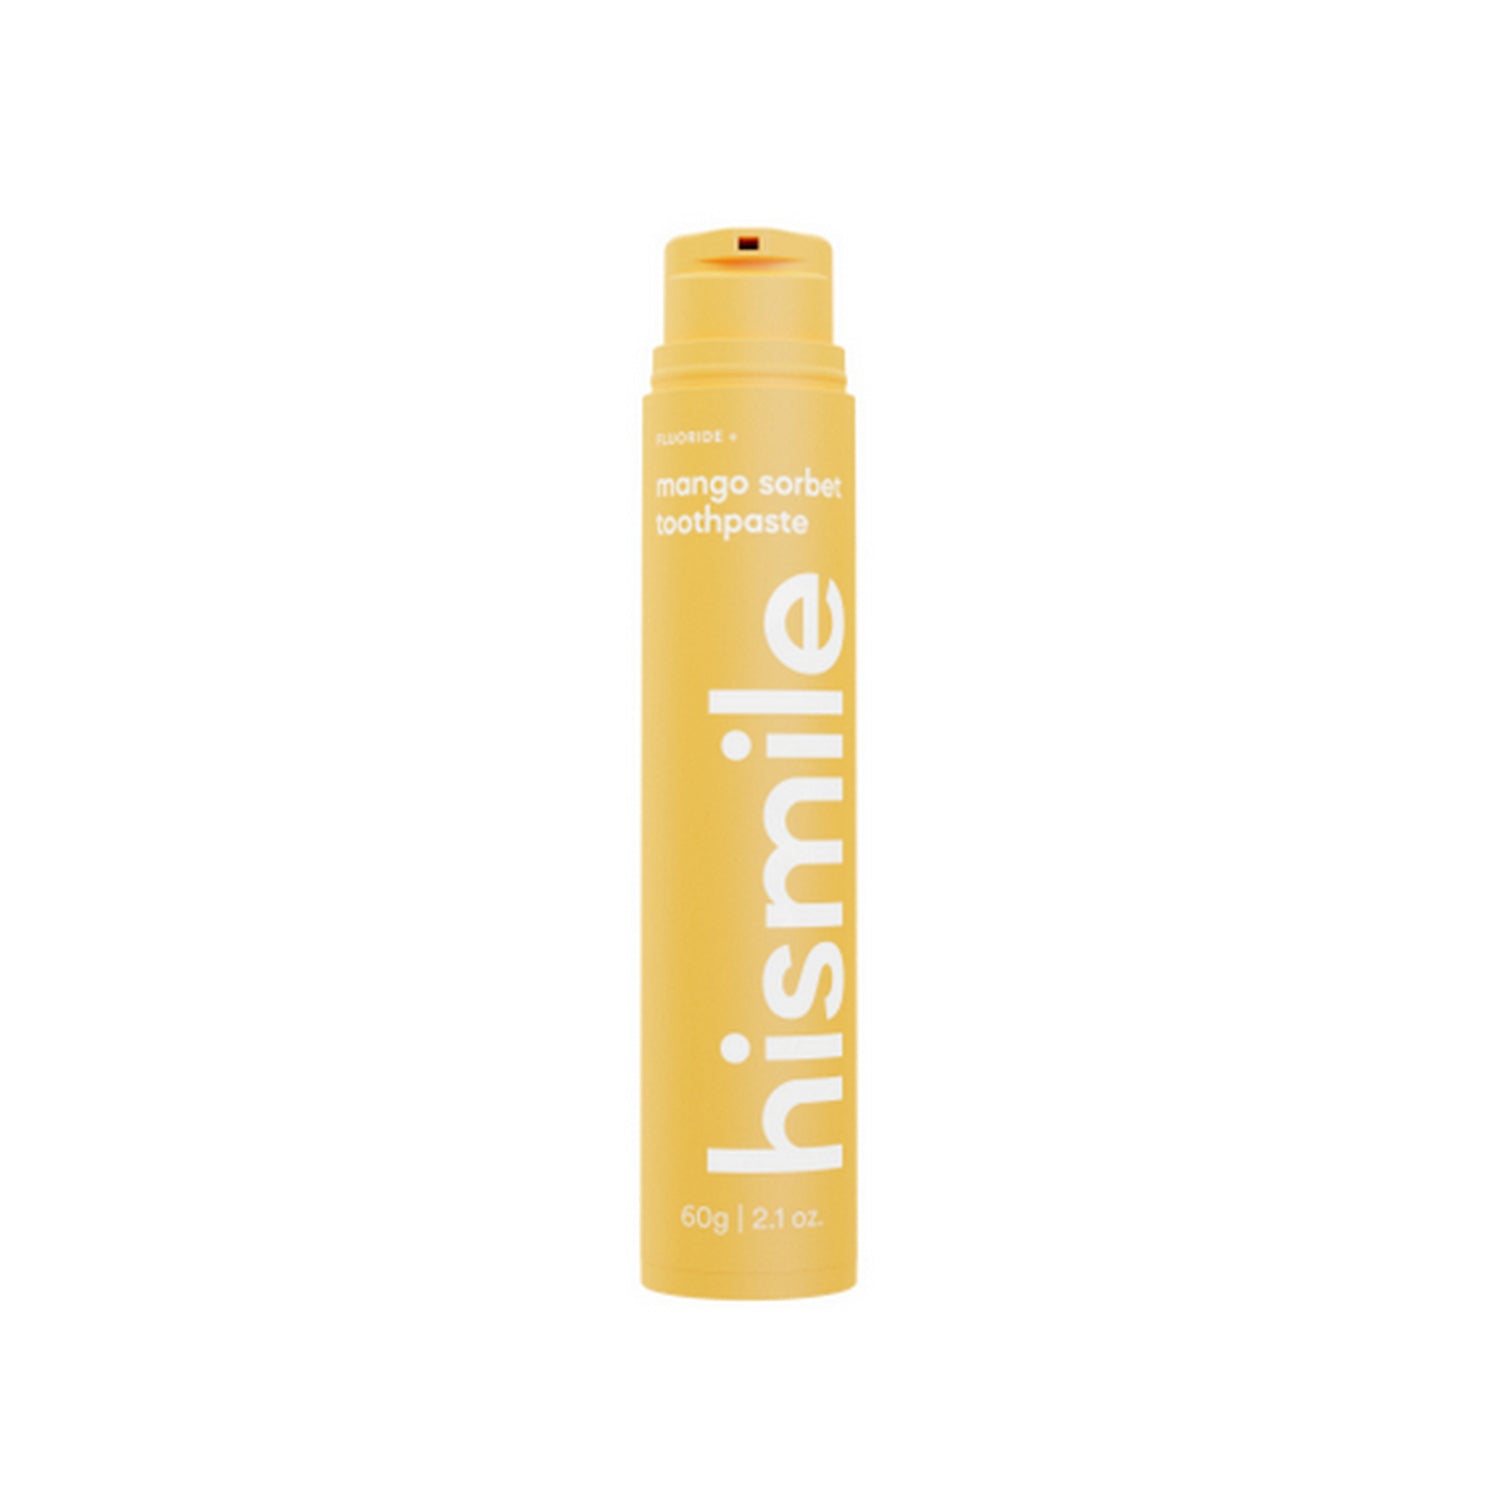 Hismile Mango Sorbet Toothpaste 60g With Cap Off